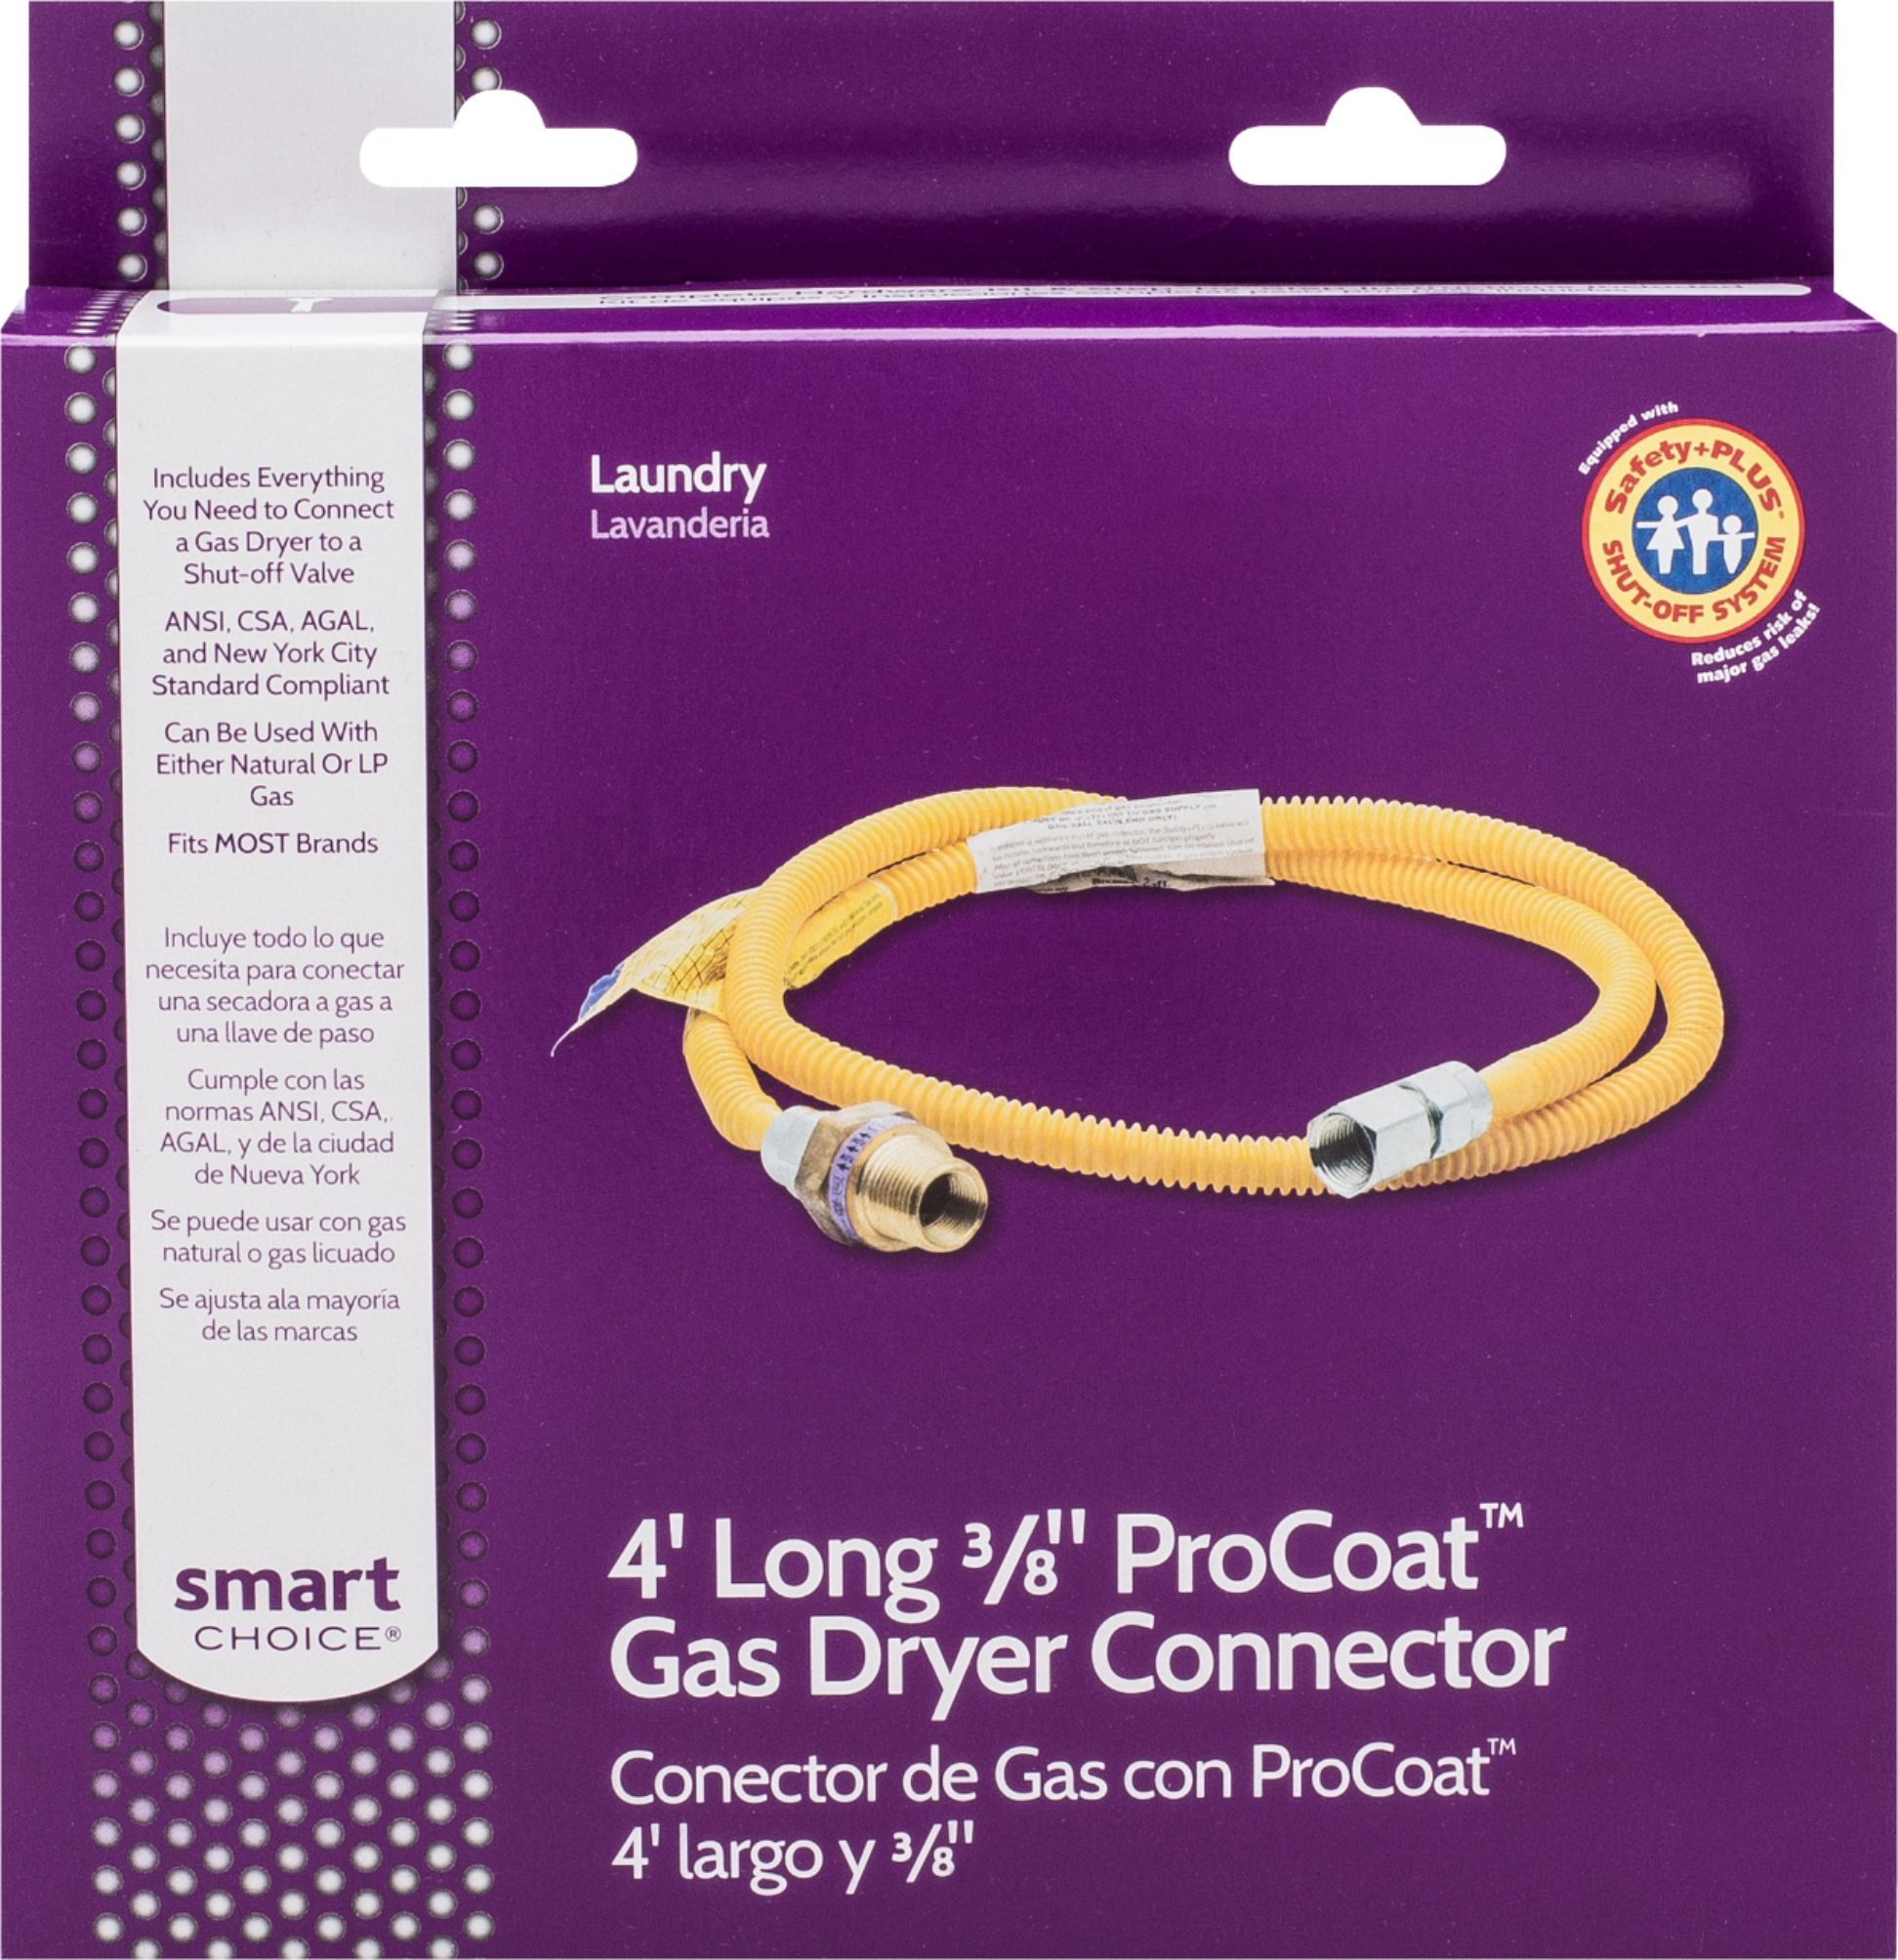 Smart Choice 4' Long 3/8 ProCoat Gas Dryer Connector